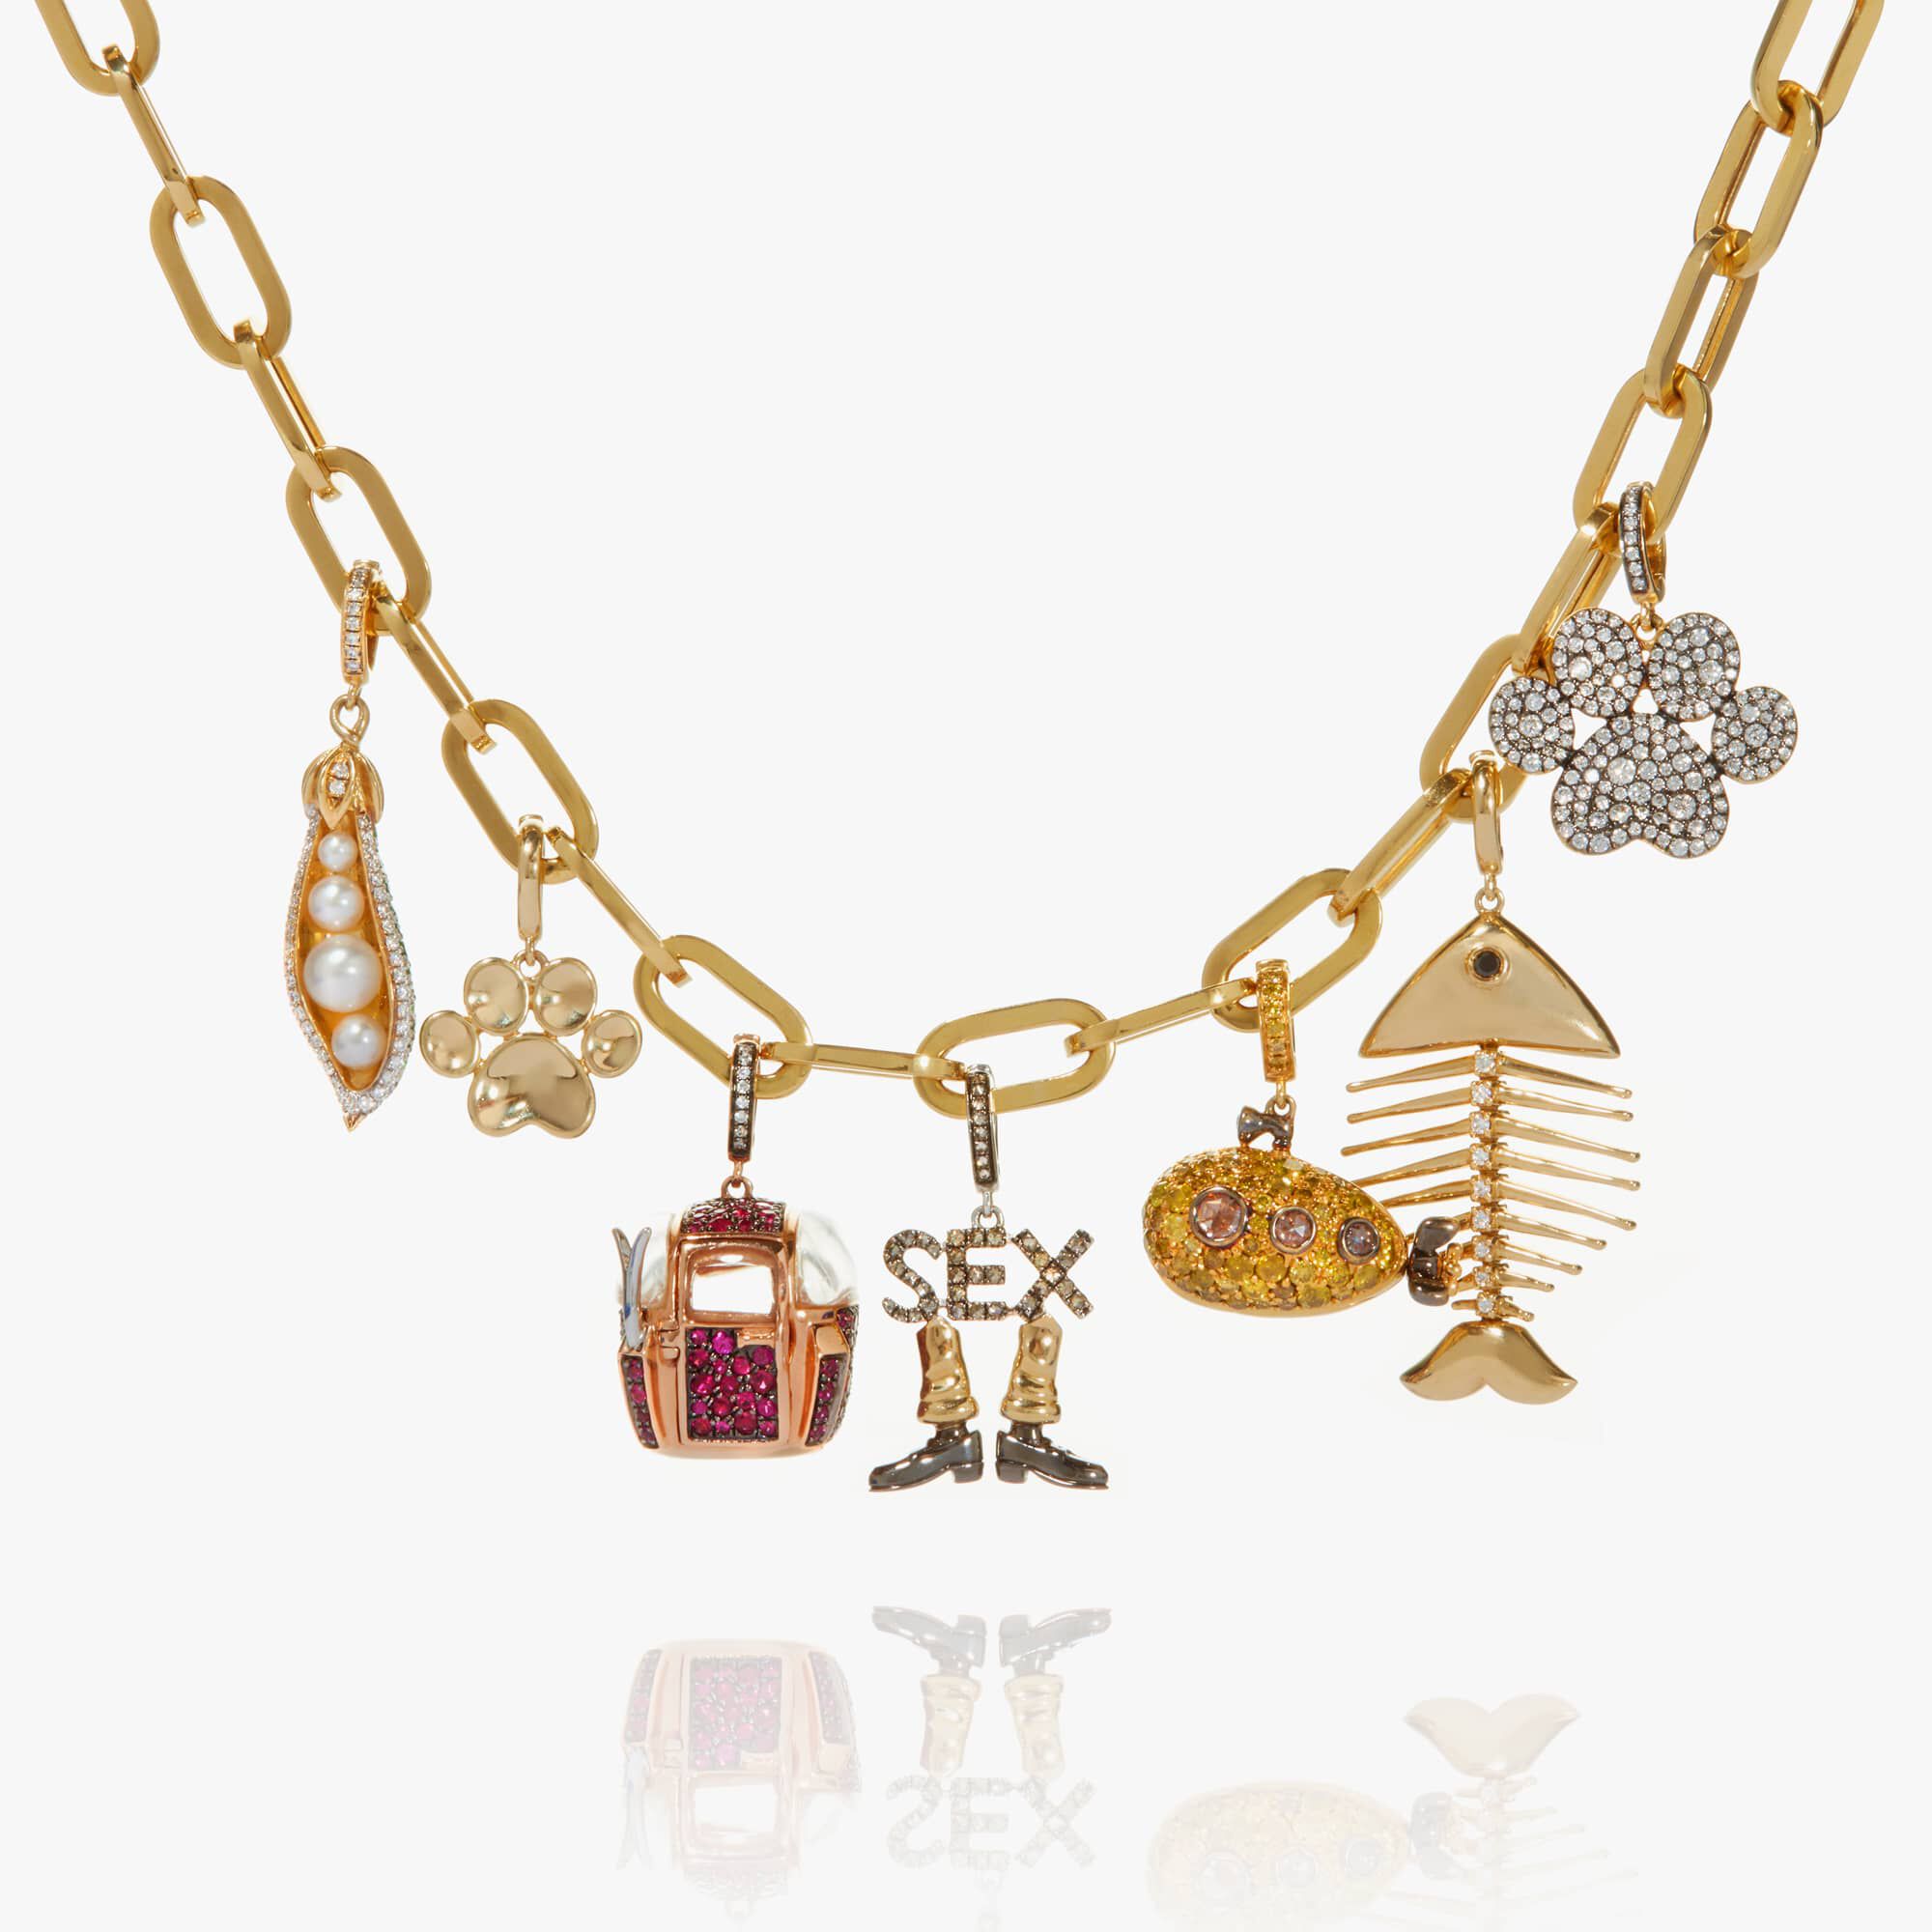 18ct Gold My Life in Seven Charm Necklace